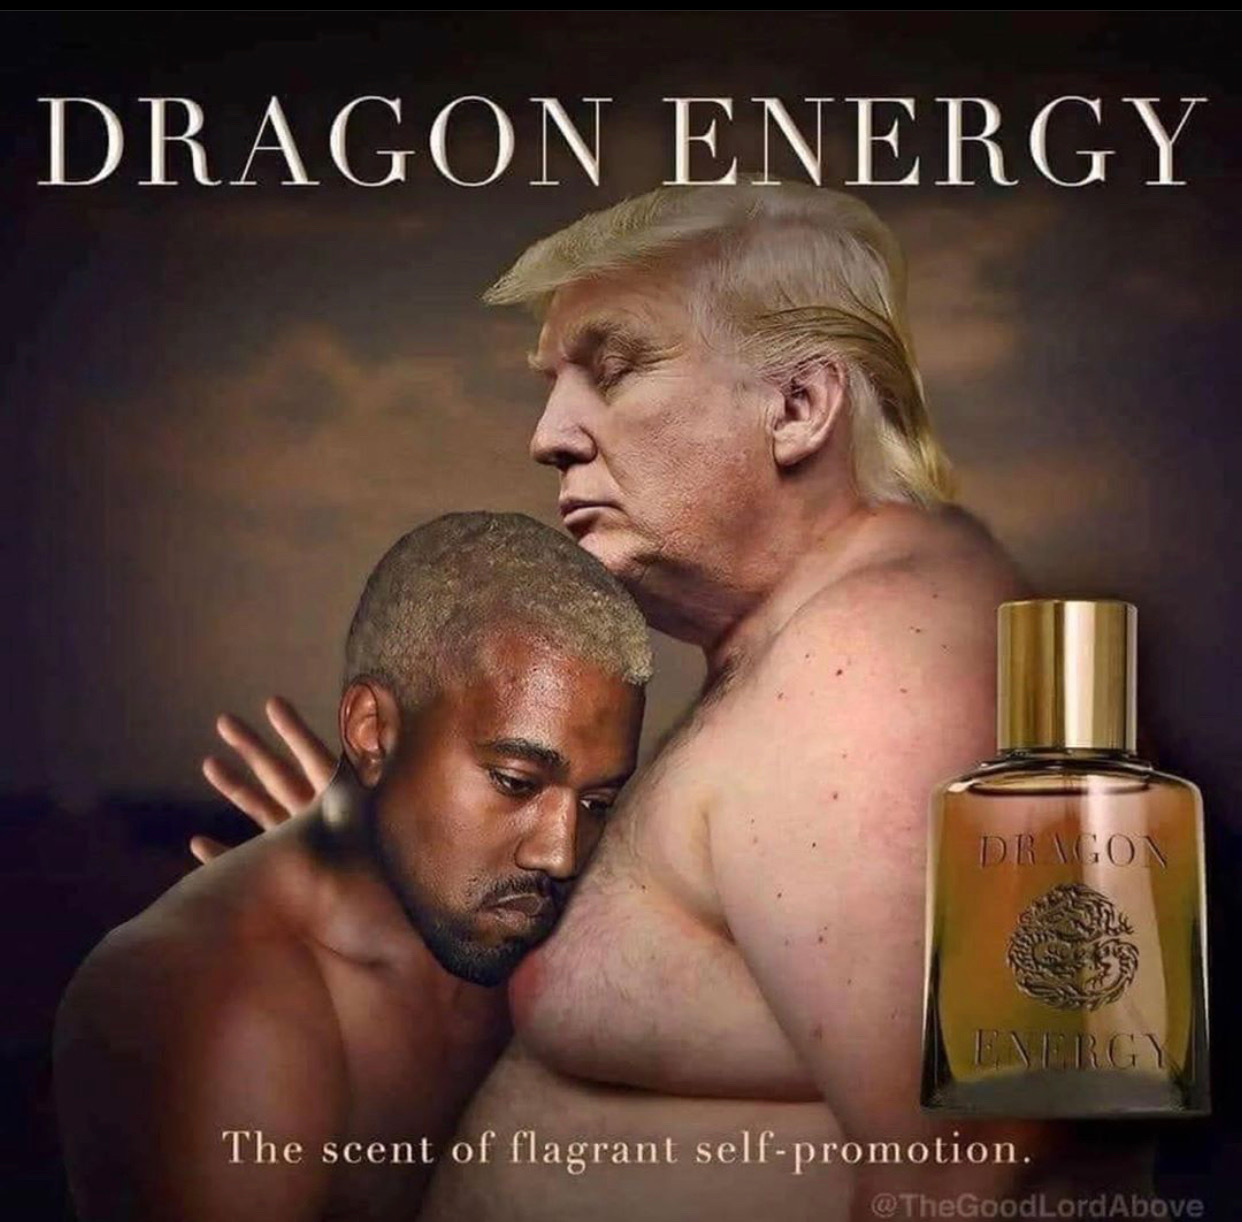 This cologne will make the women chase you! - meme